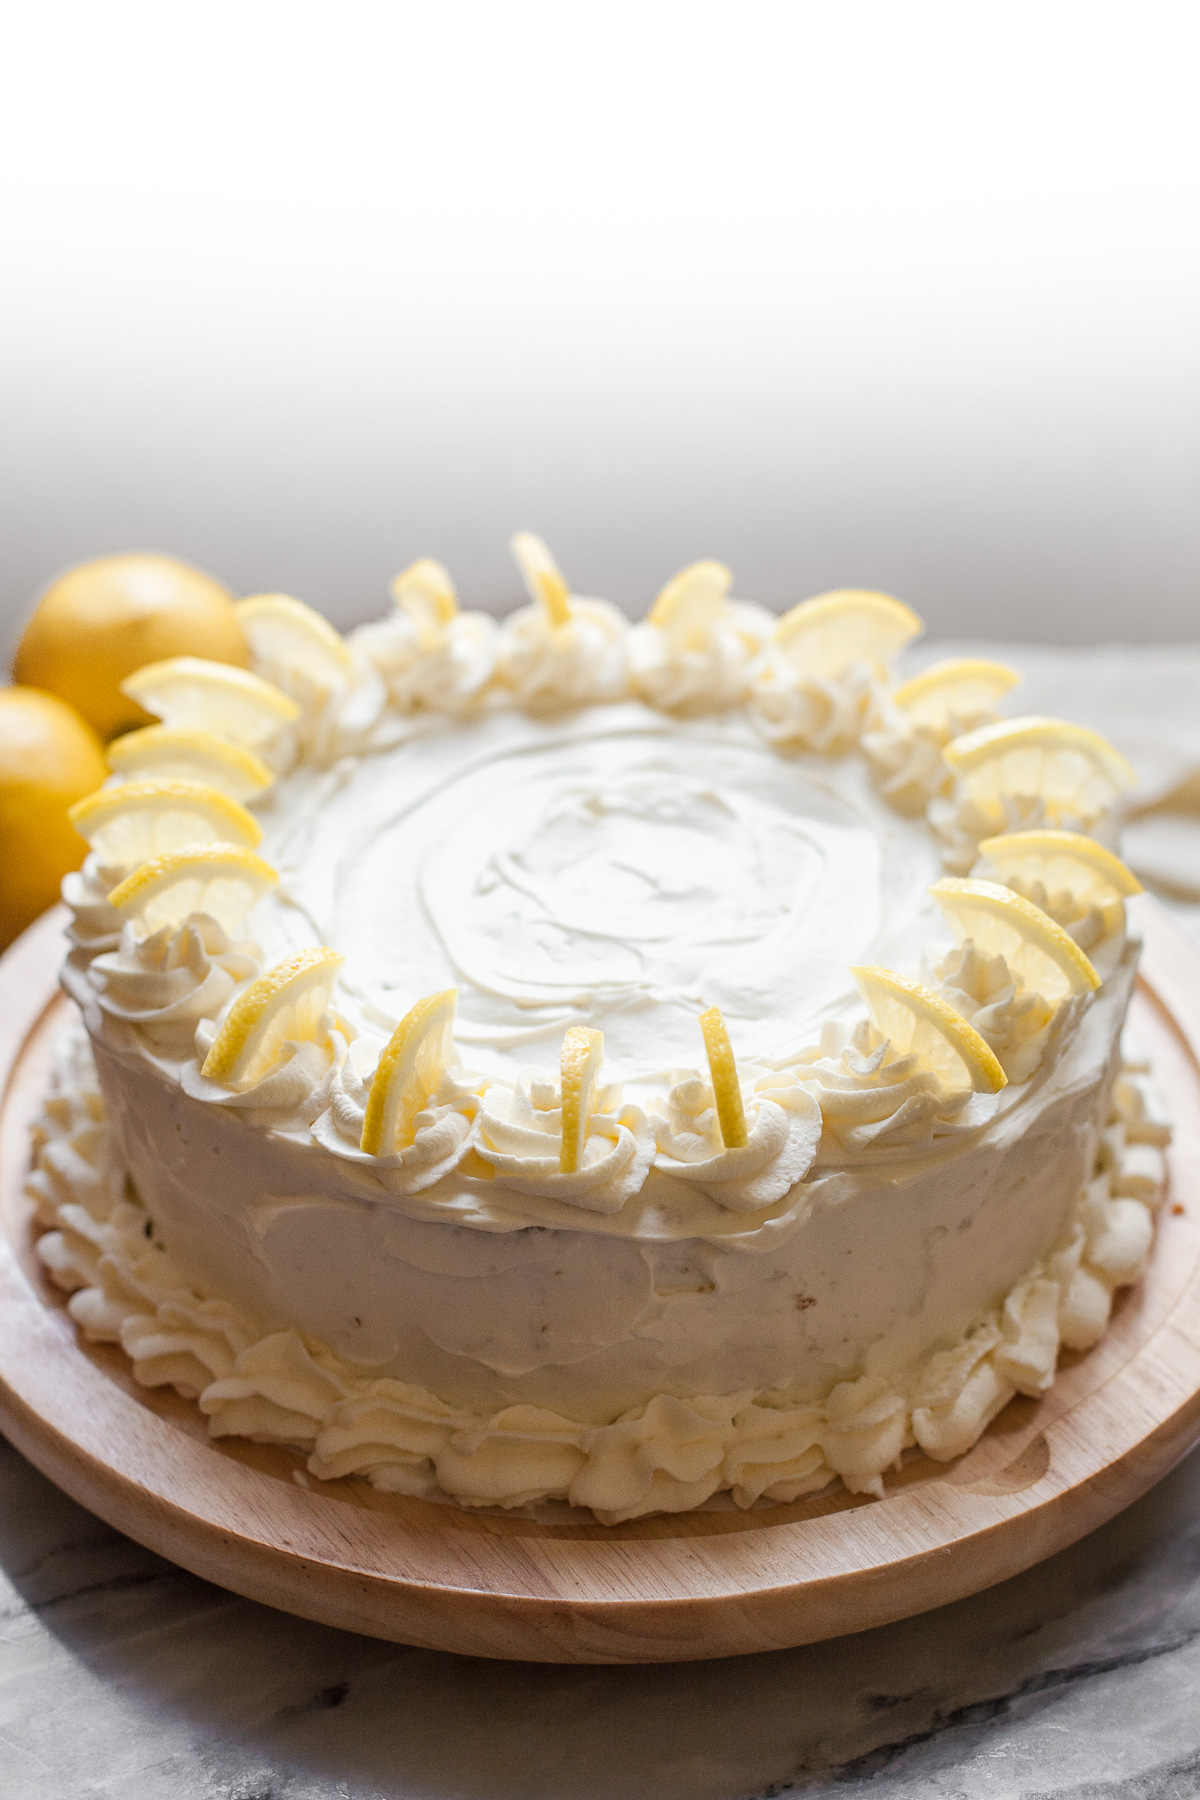 Grain-free Triple Lemon Layer Cake with Whipped Cream Frosting